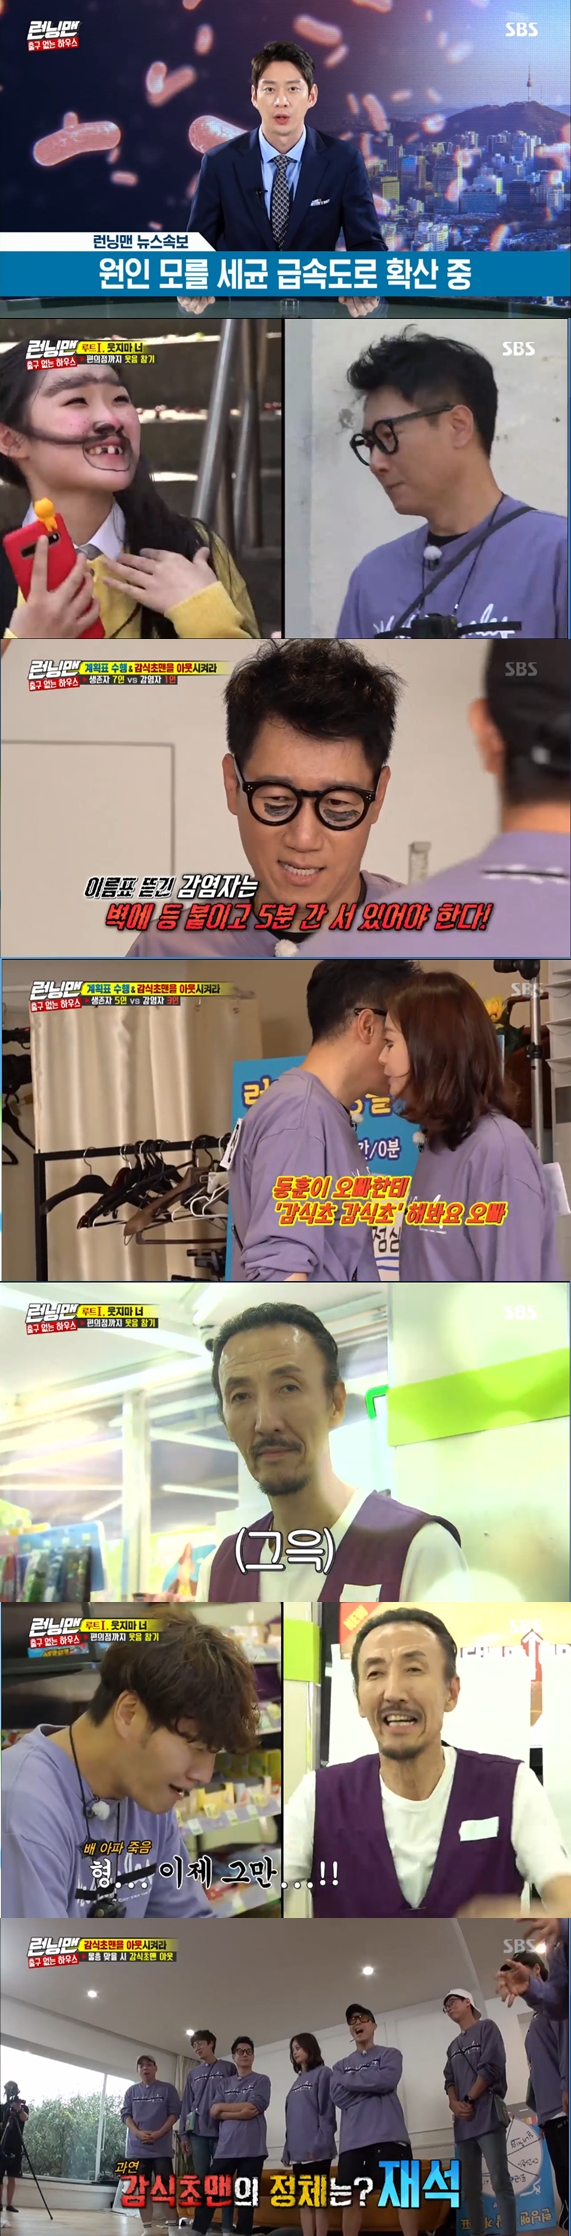 Kim Jong-kooks eye-popping was great.In the SBS entertainment program Running Man broadcasted on the afternoon of the 20th, Race without exit where members must find the persimmon vinegar infector in Yeonhee-dong pension was held.In the opening, Yoo Jae-Suk revealed that Jeon So-min had a fan meeting in the fire.Members congratulated Jeon So-min but asked why Yoo Jae-Suk didnt work together.Yoo Jae-Suk said bitterly, I do not need to call all of the Ko Young-bae to suit me anyway.Yoo Jae-Suk then asked Kim Jong-kook, Can you sing a duet with a spider alone?He said, Anyone can take Haha part, but I can call Haha part.Kim Jong-kook was conscious of Haha next to him and laughed because he said, I still need Haha, but I have to have a laughing point.Haha was angry but unable to refute, so he was alone.Prior to the start of the race, the crew suggested that the members write their own plans today, and the members planned a happy day by setting out what to eat for lunch.As the members completed their schedule, the crew released Races hidden mission today; inside the pension, the members watched a video containing the mission.The video showed a scene from the news, where the anchor informed the nation that it was Infected by persimmon vinegar.The crew informed the members of the doubt that they should get out the persimmon vinegar man hidden among the members within a certain time.The crew added that if a member who is not infected goes out, it will be infected by persimmon vinegar in case of mission failure.Members who heard the commission this week tried to find the persimmon vinegar man, but the members who did not have lunch agreed to eat lunch first.But the pension had only rice and someone had to go outside and buy food; the members sent out Ji Suk-jin, the most suspected persimmon vinegar man after the agreement.Out, Ji Suk-jin found a cell phone in front of the pension door; the crew instructed Ji Suk-jin to pick one.The cell phone had a route to a convenience store, and the crew told them not to laugh at it, saying that they should go to a convenience store only with the route.When he heard the order, Ji Suk-jin said, Its not so hard. But the way the crew informed him was a laughing mine.A girl who approached him under the guise of a Ji Suk-jin fan had a nose hair makeup.Ji Suk-jin, who barely survived the first Danger, but was infected by persimmon vinegar without overcoming the lady who made up.Ji Suk-jin, who returned from infection with persimmon vinegar, pointed to Yang Se-chan as a member with a high probability of success.With the expectation of the members, The Departed Yang Se-chan arrived at the convenience store after overcoming Danger at the beginning, but he did not cross the last gate and laughed.Although he failed to commission, Yang Se-chan returned to the pension with the members buying food to eat.The pension already had two Infectors, including Jeon So-min, who was infected by Ji Suk-jin.As the number increased to three, Infectioners began to search for persimmon vinegar men.The crew told Infectioners that if they told the persimmon vinegar man to persimmon vinegar, persimmon vinegar man would respond with  vinegar vinegar.Jeon So-min gave the most suspicious Haha the password, and Haha responded with vineyard vinegar.But when Ji Suk-jin said the same thing, he answered with persimmon vinegar and confused the three Infectors.The members who ate ramen gave a special mission to catch the persimmon vinegar man.Two of the members promised to give hints if Ji Suk-jin and Yang Se-chan perform failed missions.Kim Jong-kook and Lee Kwang-soo slapped each other on the cheek before The Departure and vowed never to laugh.But their will did not go long.Kim Jong-kook, who did not laugh well when he saw the members makeup, was hit by a big Danger from the first laughing mine, the nose girl.The two men, who barely overcame their first Danger, vowed again to cry whenever they tried to laugh.By crying, the two could reach the final stage of Yang Se-chans failure, but Lee Kwang-soo laughed as soon as he appeared at the convenience store.There was a Han Ki-bum dressed as a clerk at a convenience store. Lee Kwang-soo said Kim Jong-kook should abstain.Kim Jong-kook, who entered the convenience store in a nervous state, was hit by Danger, but eventually managed to get rid of the smile.Han Ki-beom also admitted Kim Jong-kook, saying, Its really strong.The persimmon vinegar man was Yoo Jae-Suk; Yoo Jae-Suk never teemed, so he could hide his identity until the last minute.Kim Jong-kook, however, noticed that Yoo Jae-Suk was responding to persimmon vinegar man and succeeded in arresting him.